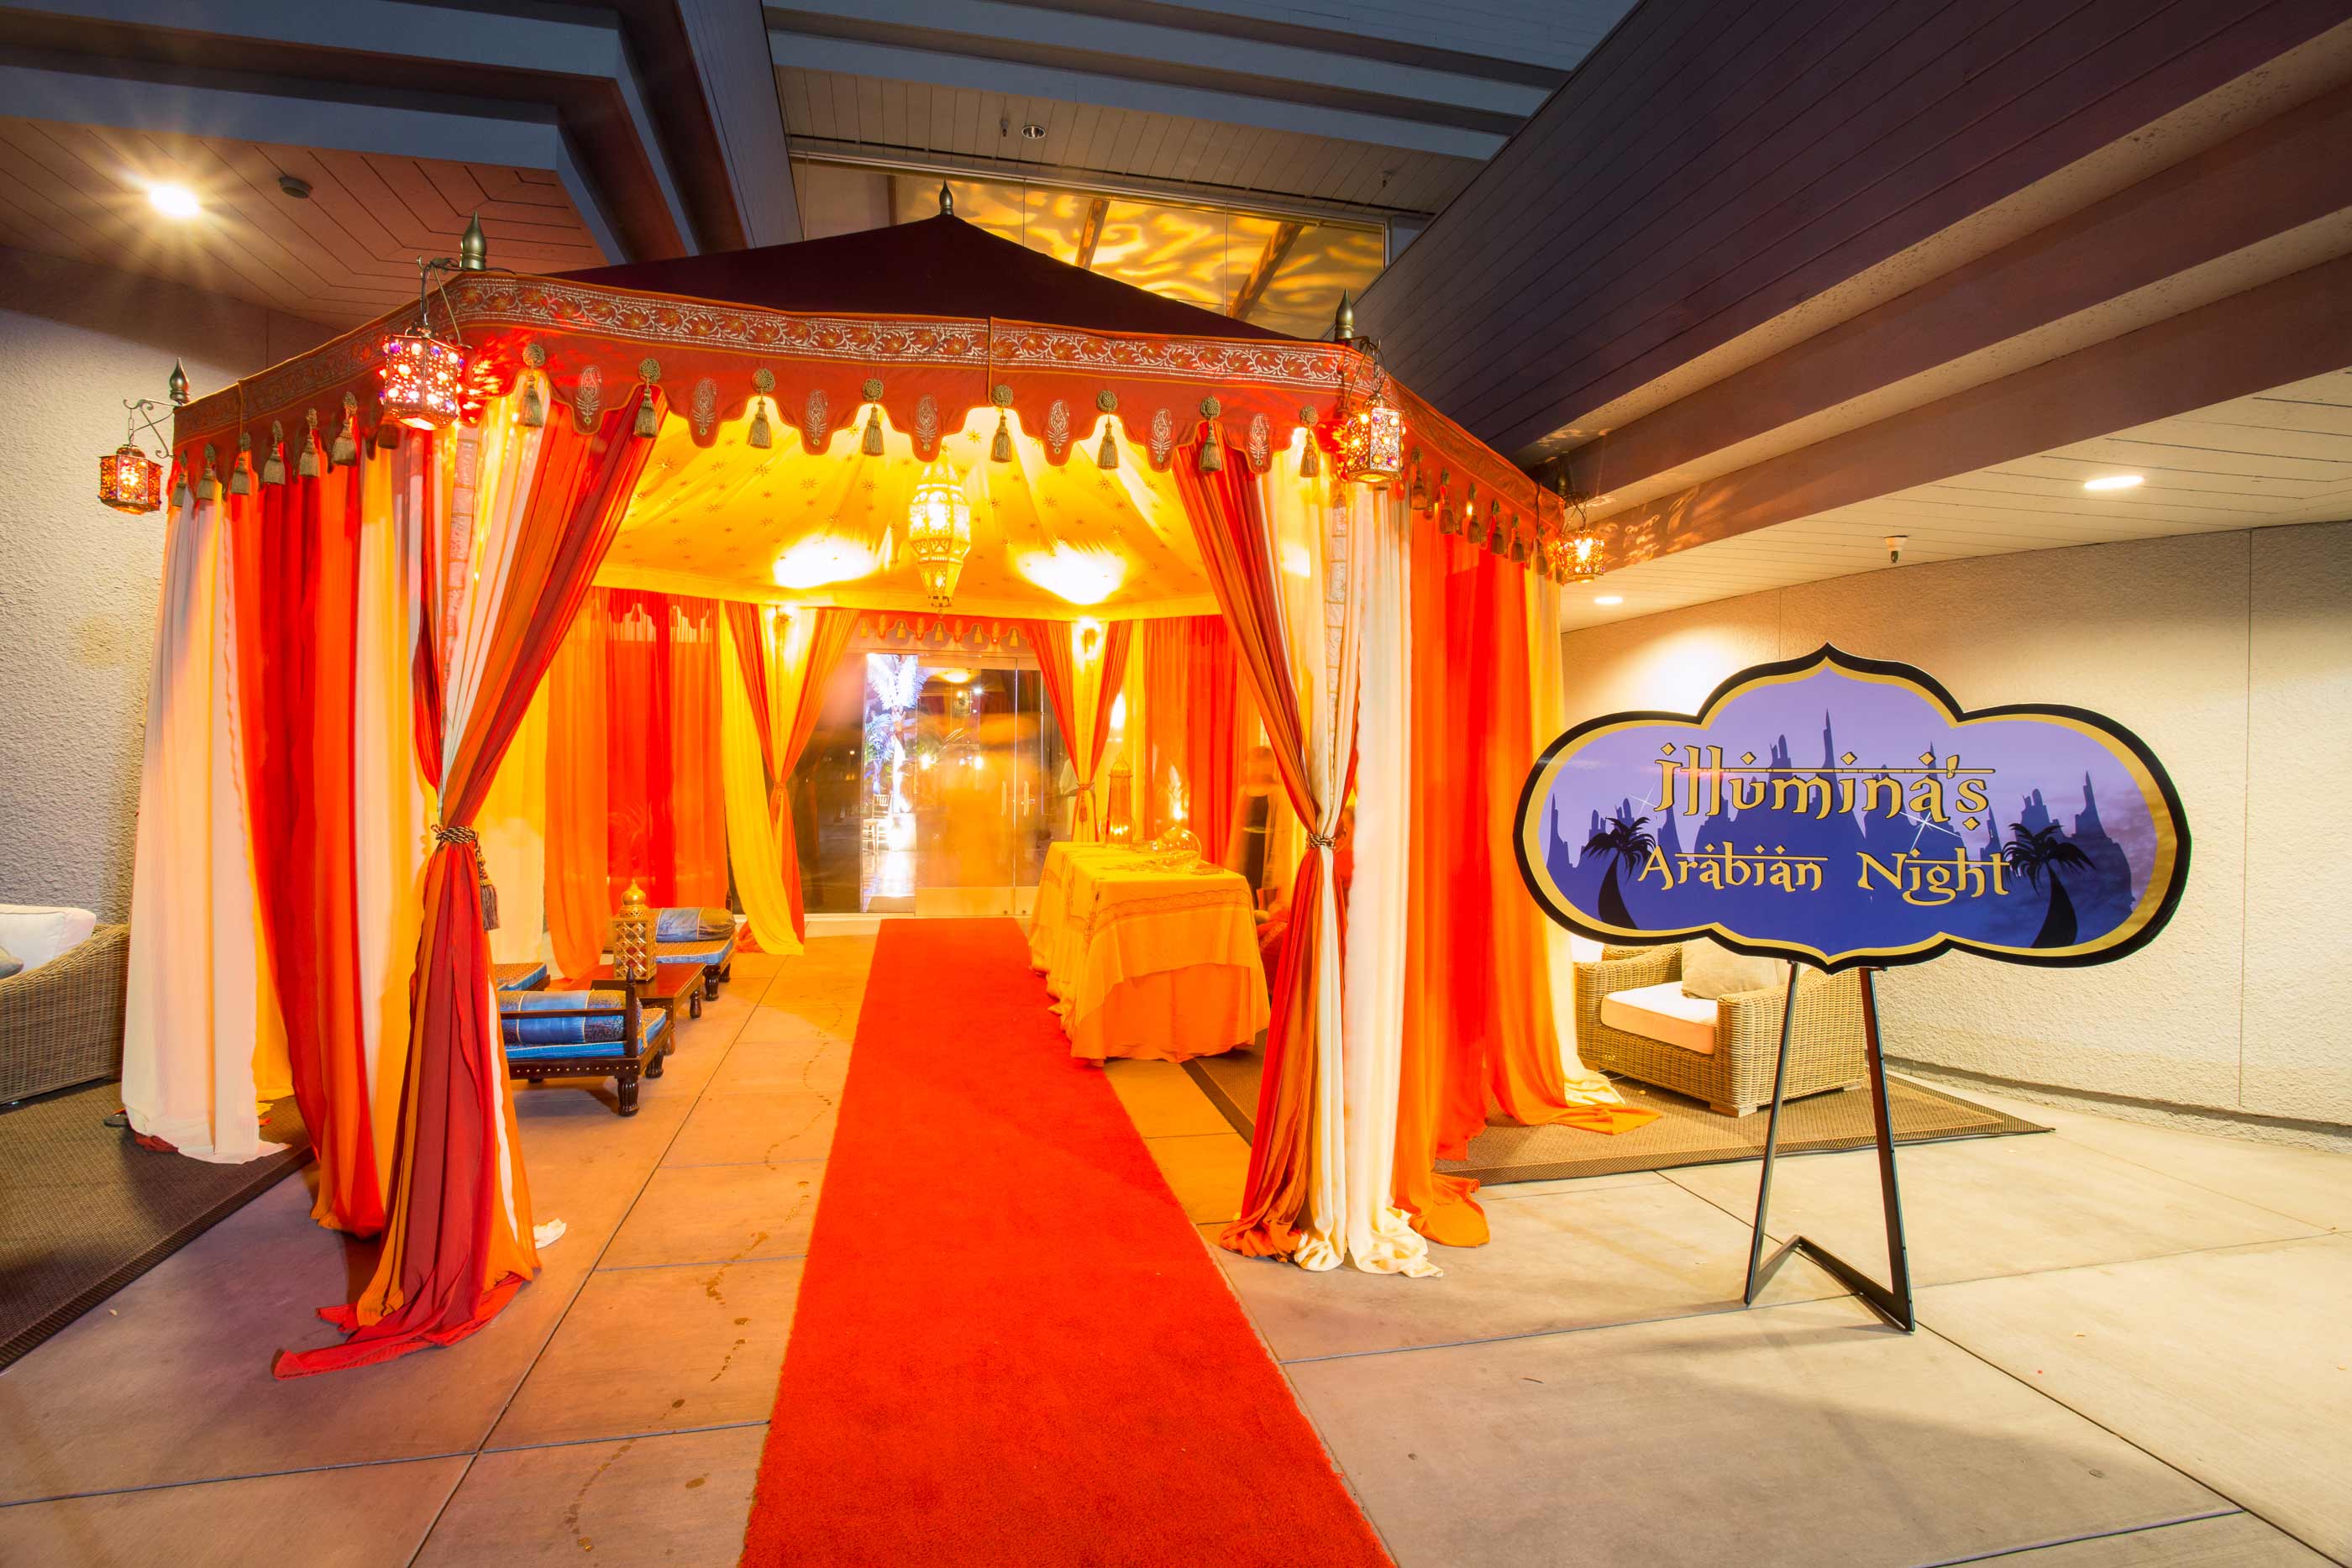 How To Throw a Las Vegas Themed Party Ideas - The Arabian Tent Company